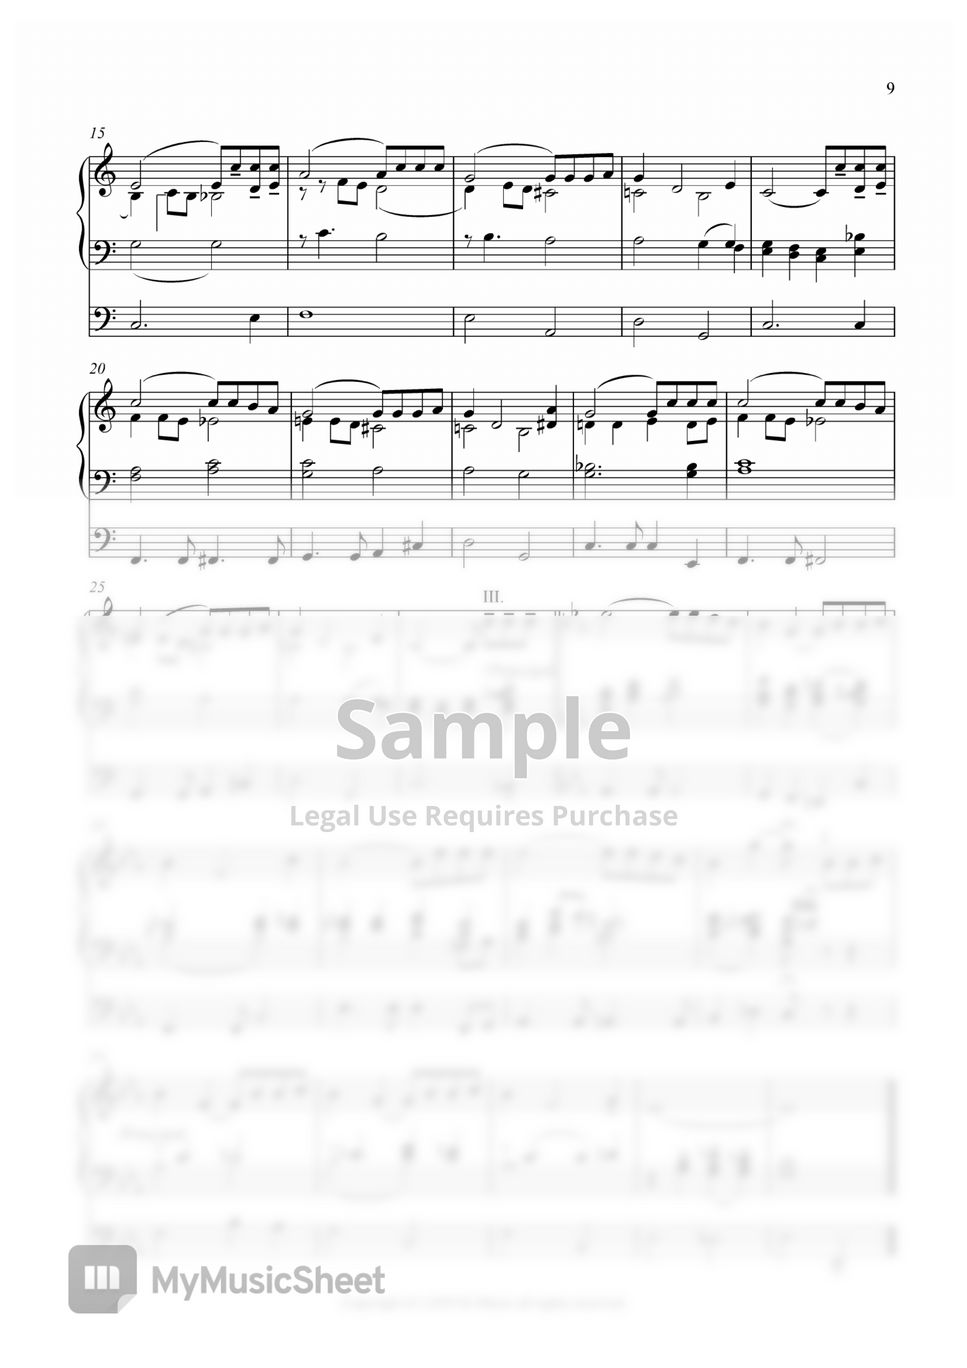 Frederick Martin Lehman - The love of God (organsolo) Sheets by TS-Kang